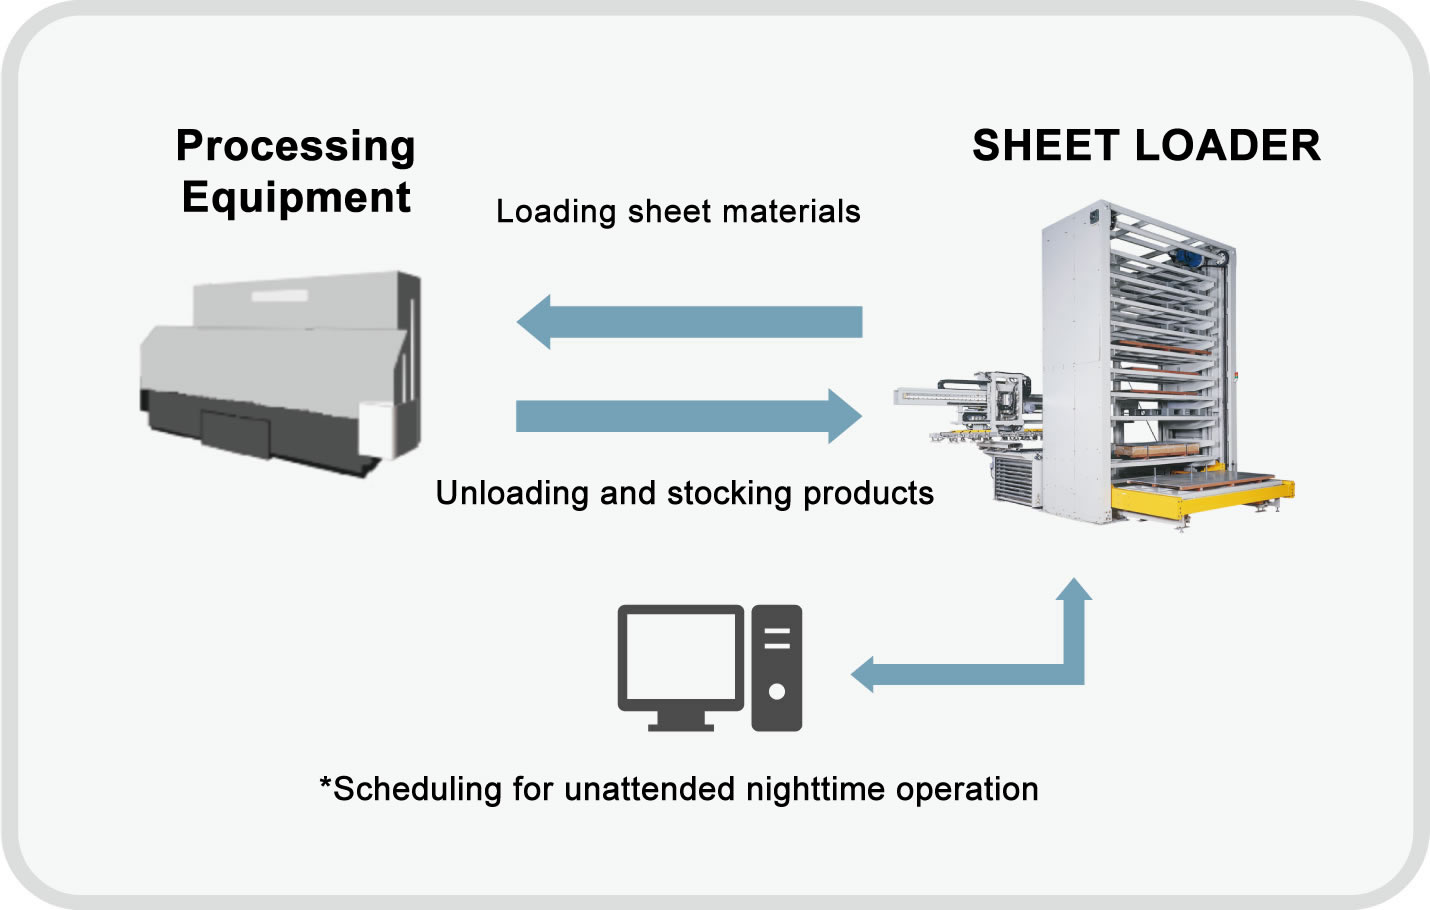 Sheet Loader and Processing Equipment